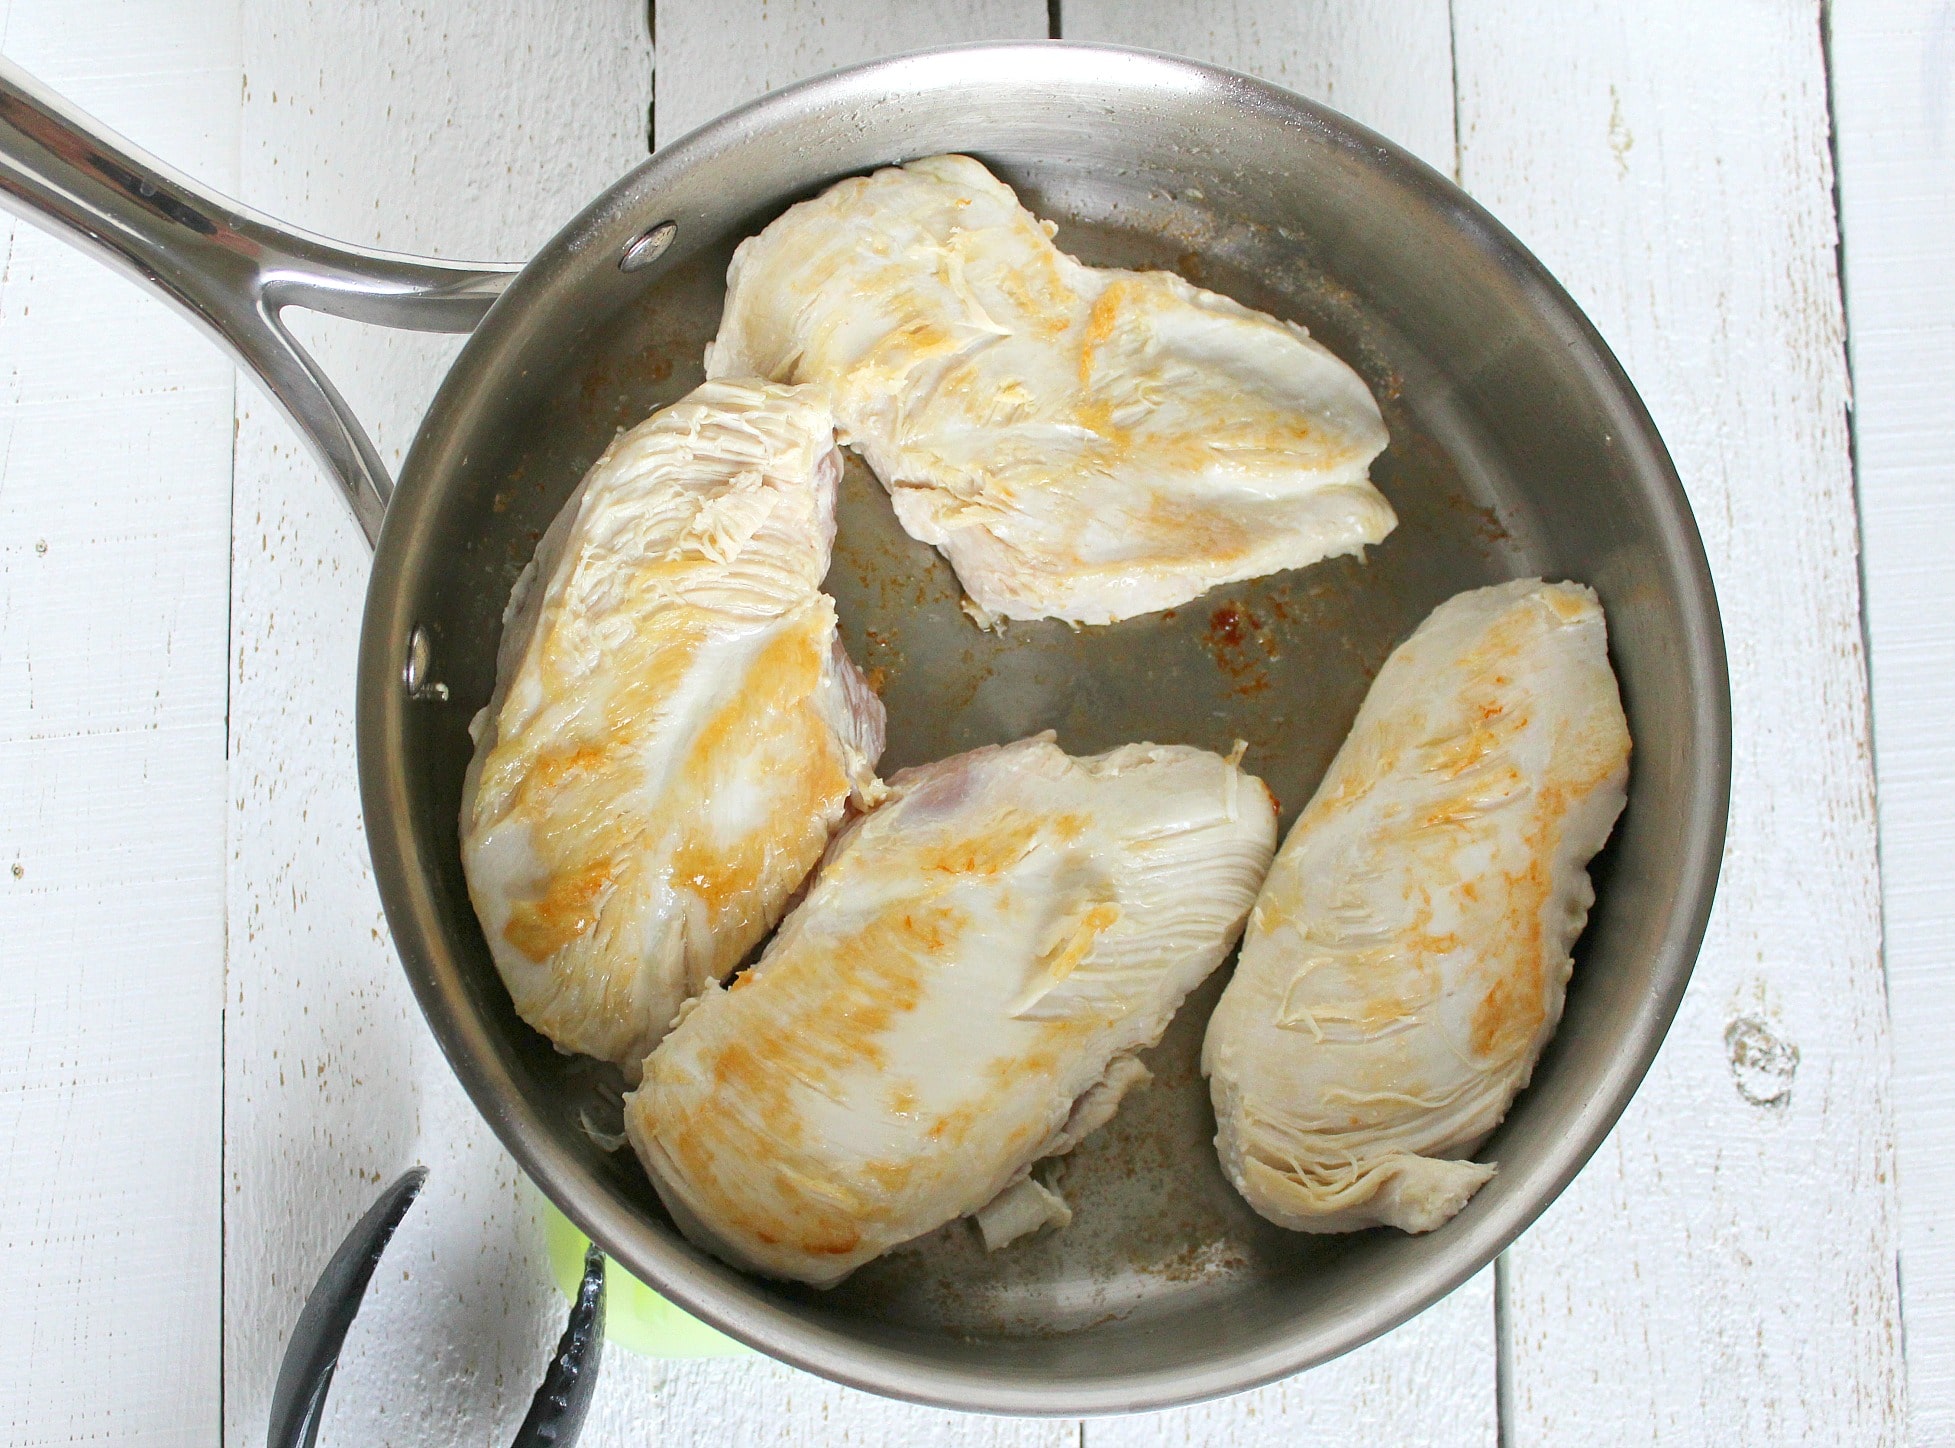 Using a large, greased skillet, brown the chicken breasts. 